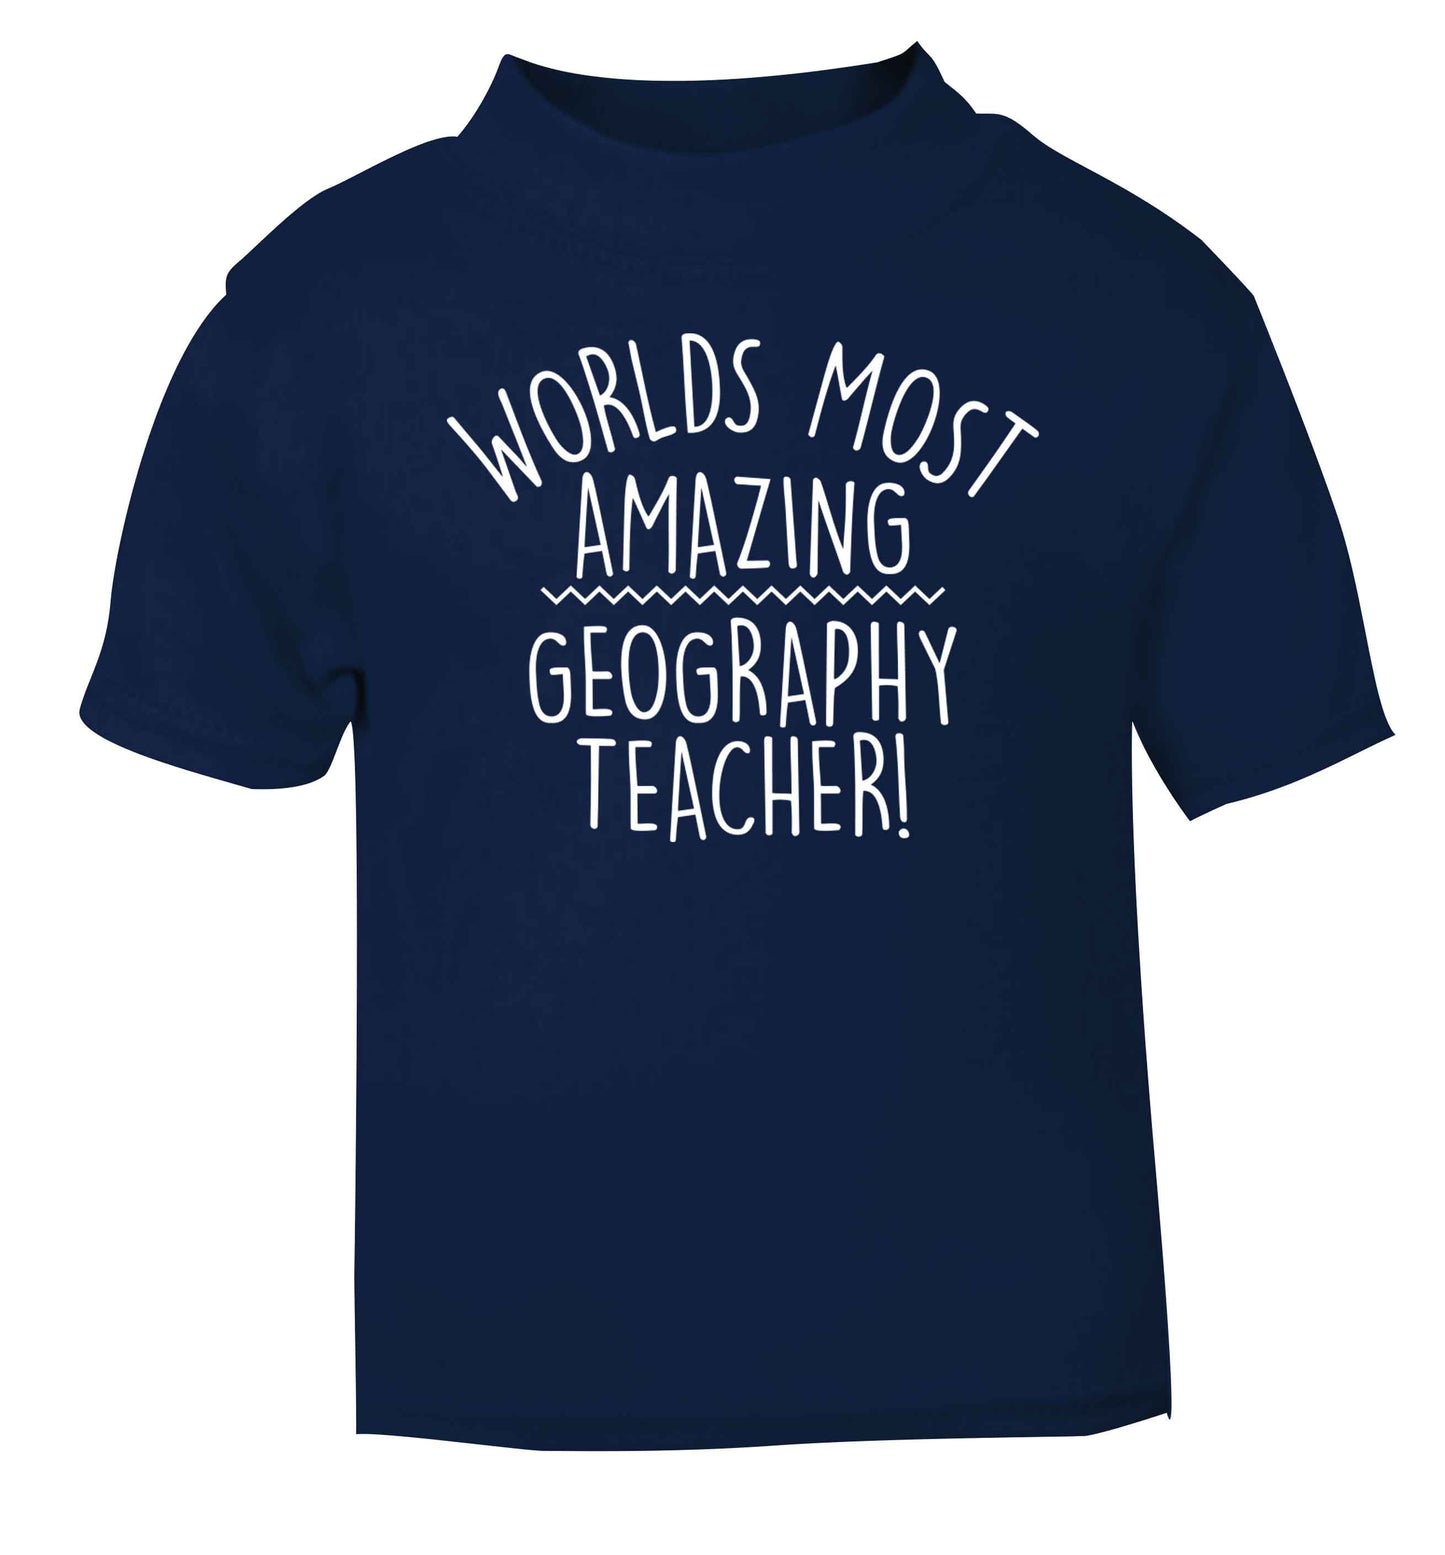 Worlds most amazing geography teacher navy baby toddler Tshirt 2 Years